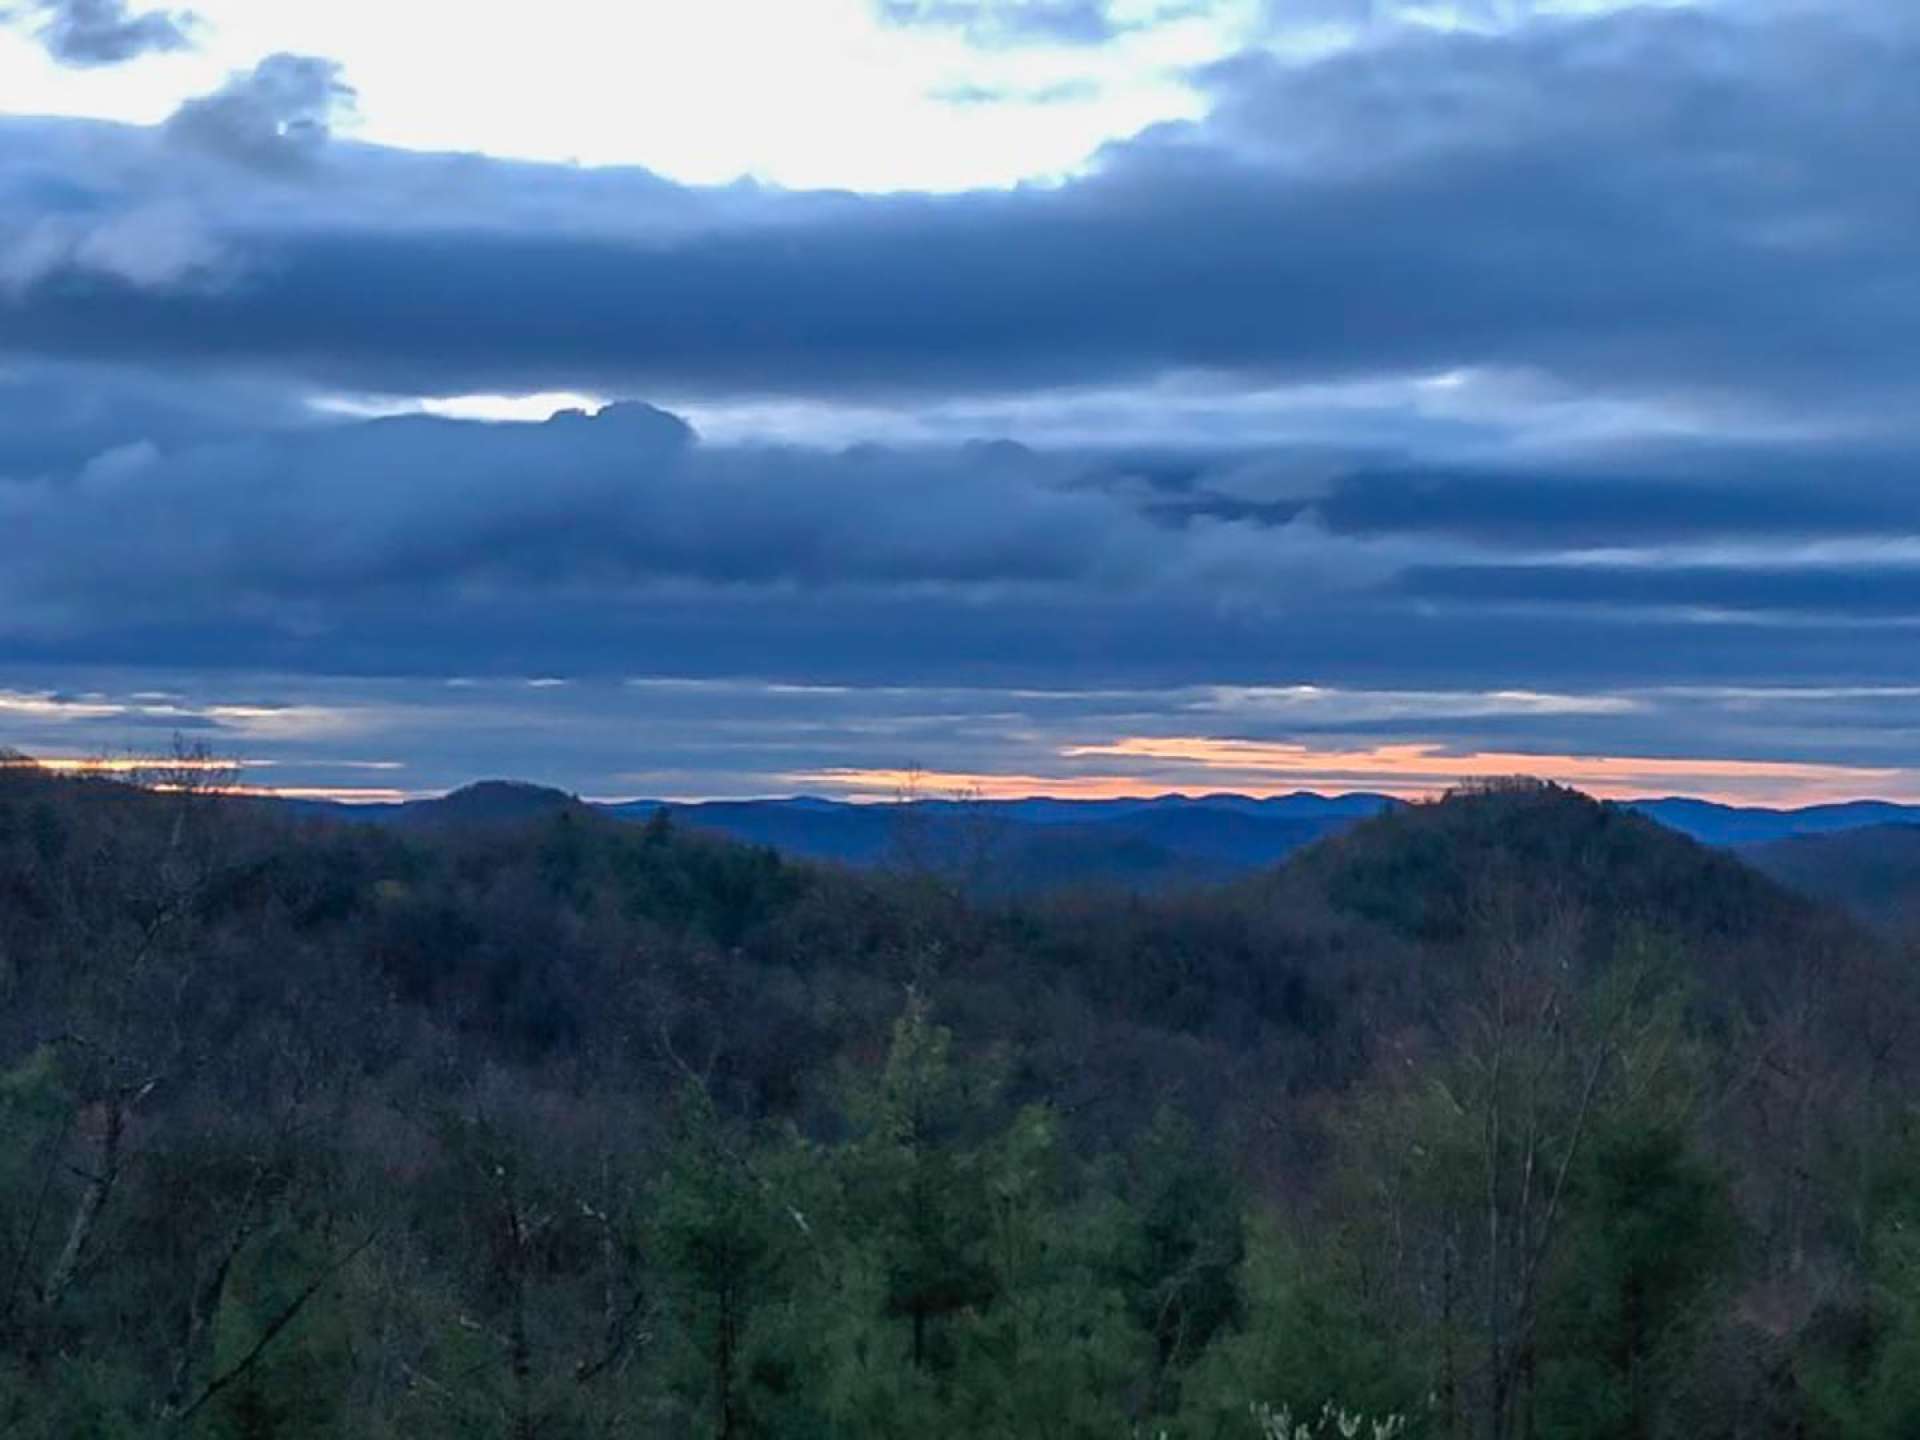 Colorful sunsets and fresh mountain air, a wonderful end to a day spent in the Blue Ridge Mountains of North Carolina.